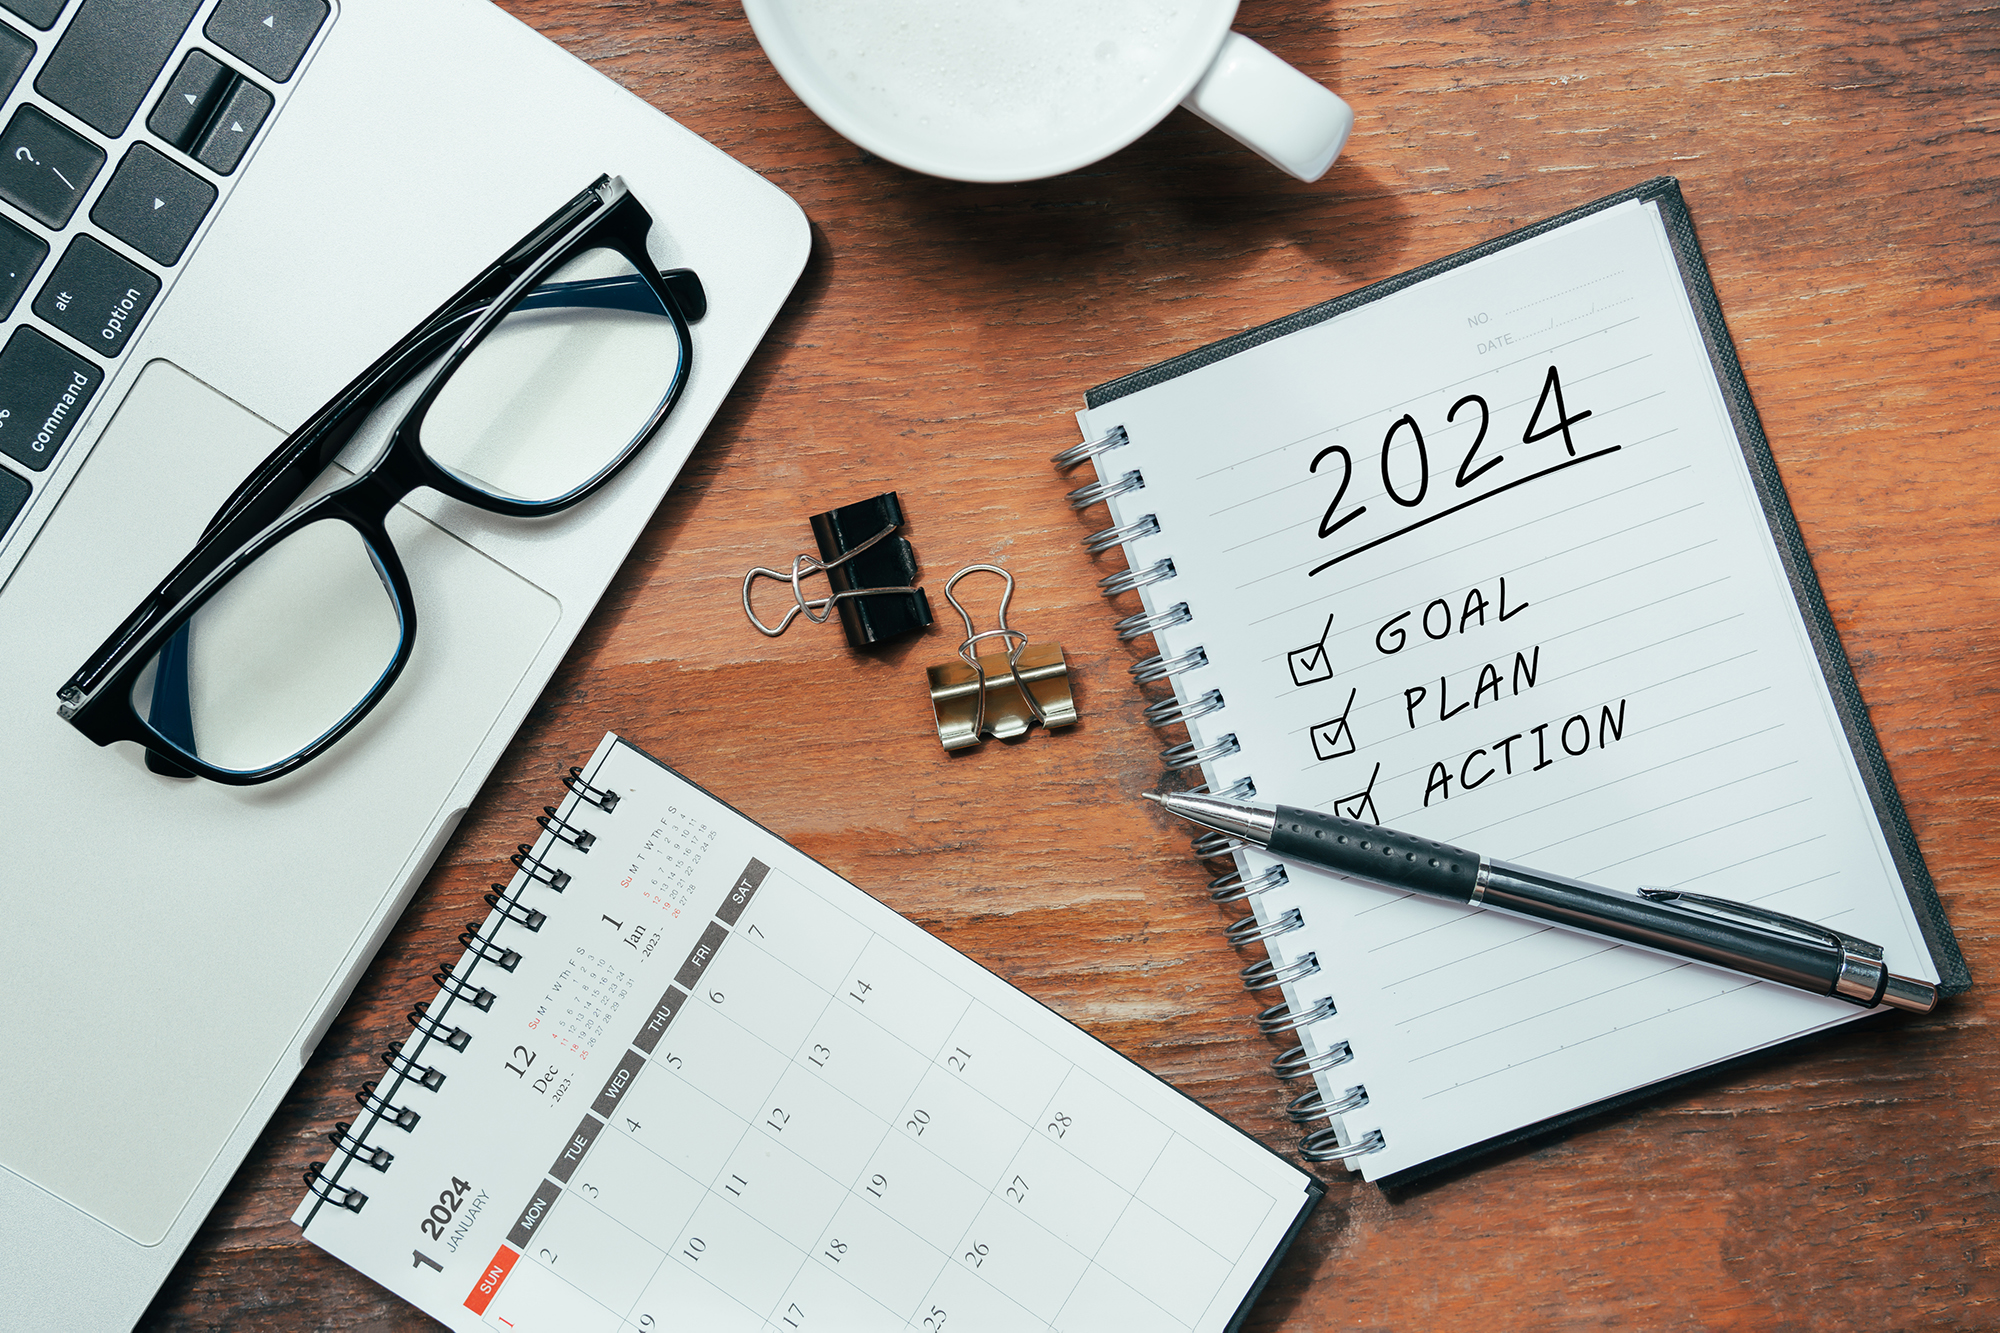 New Year's resolutions 2024 on wooden table. Goals, plans and action ideas for New Year 2024. Notebook with fingerprints. Coffee cup on table, goal, resolution, plan, action, checklist concept